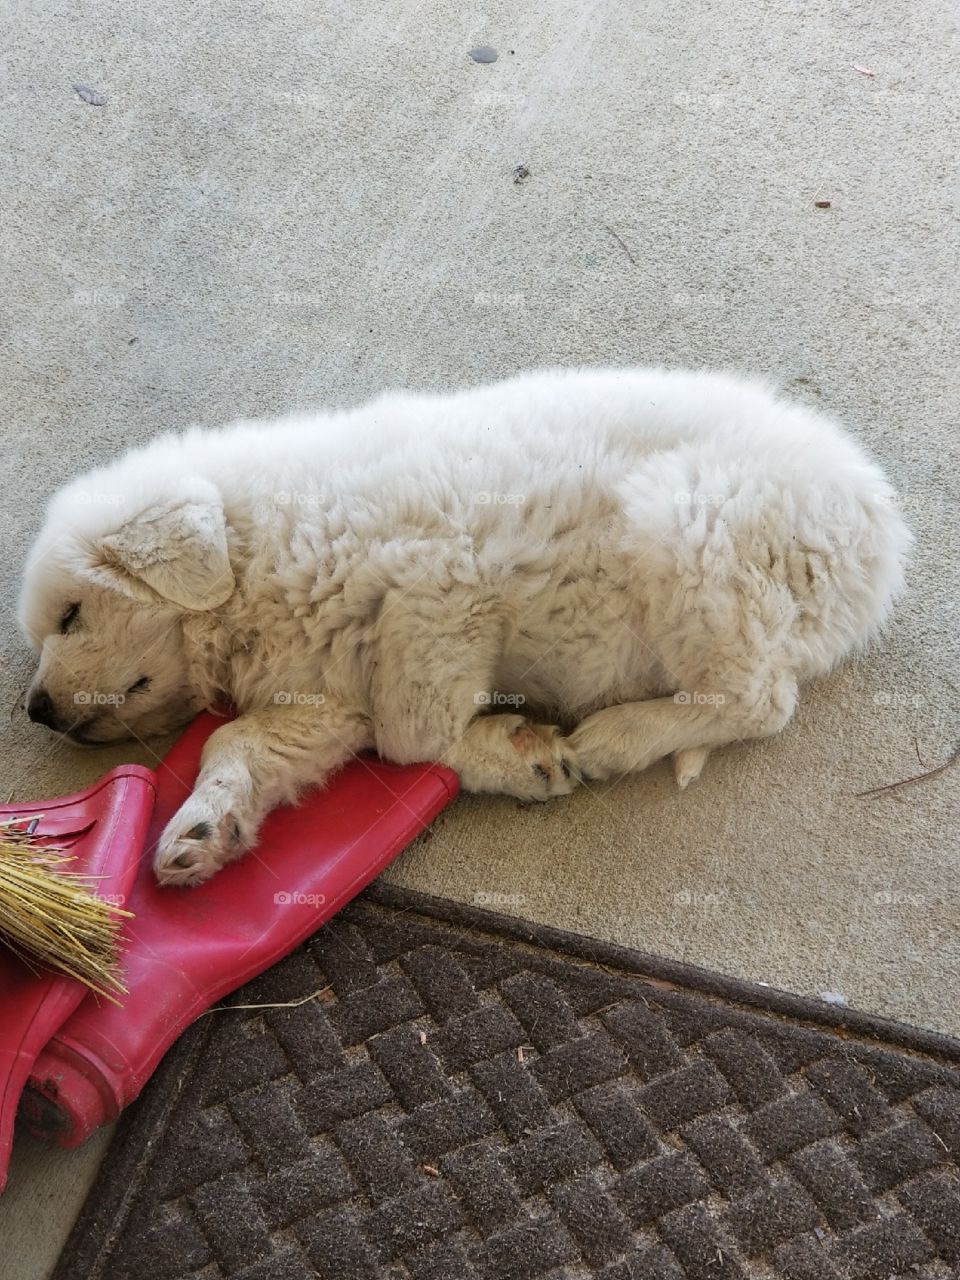 Napping after playing hard. Fluffy and adorable, we never tire of watching our Great White Pyrenees puppy. 